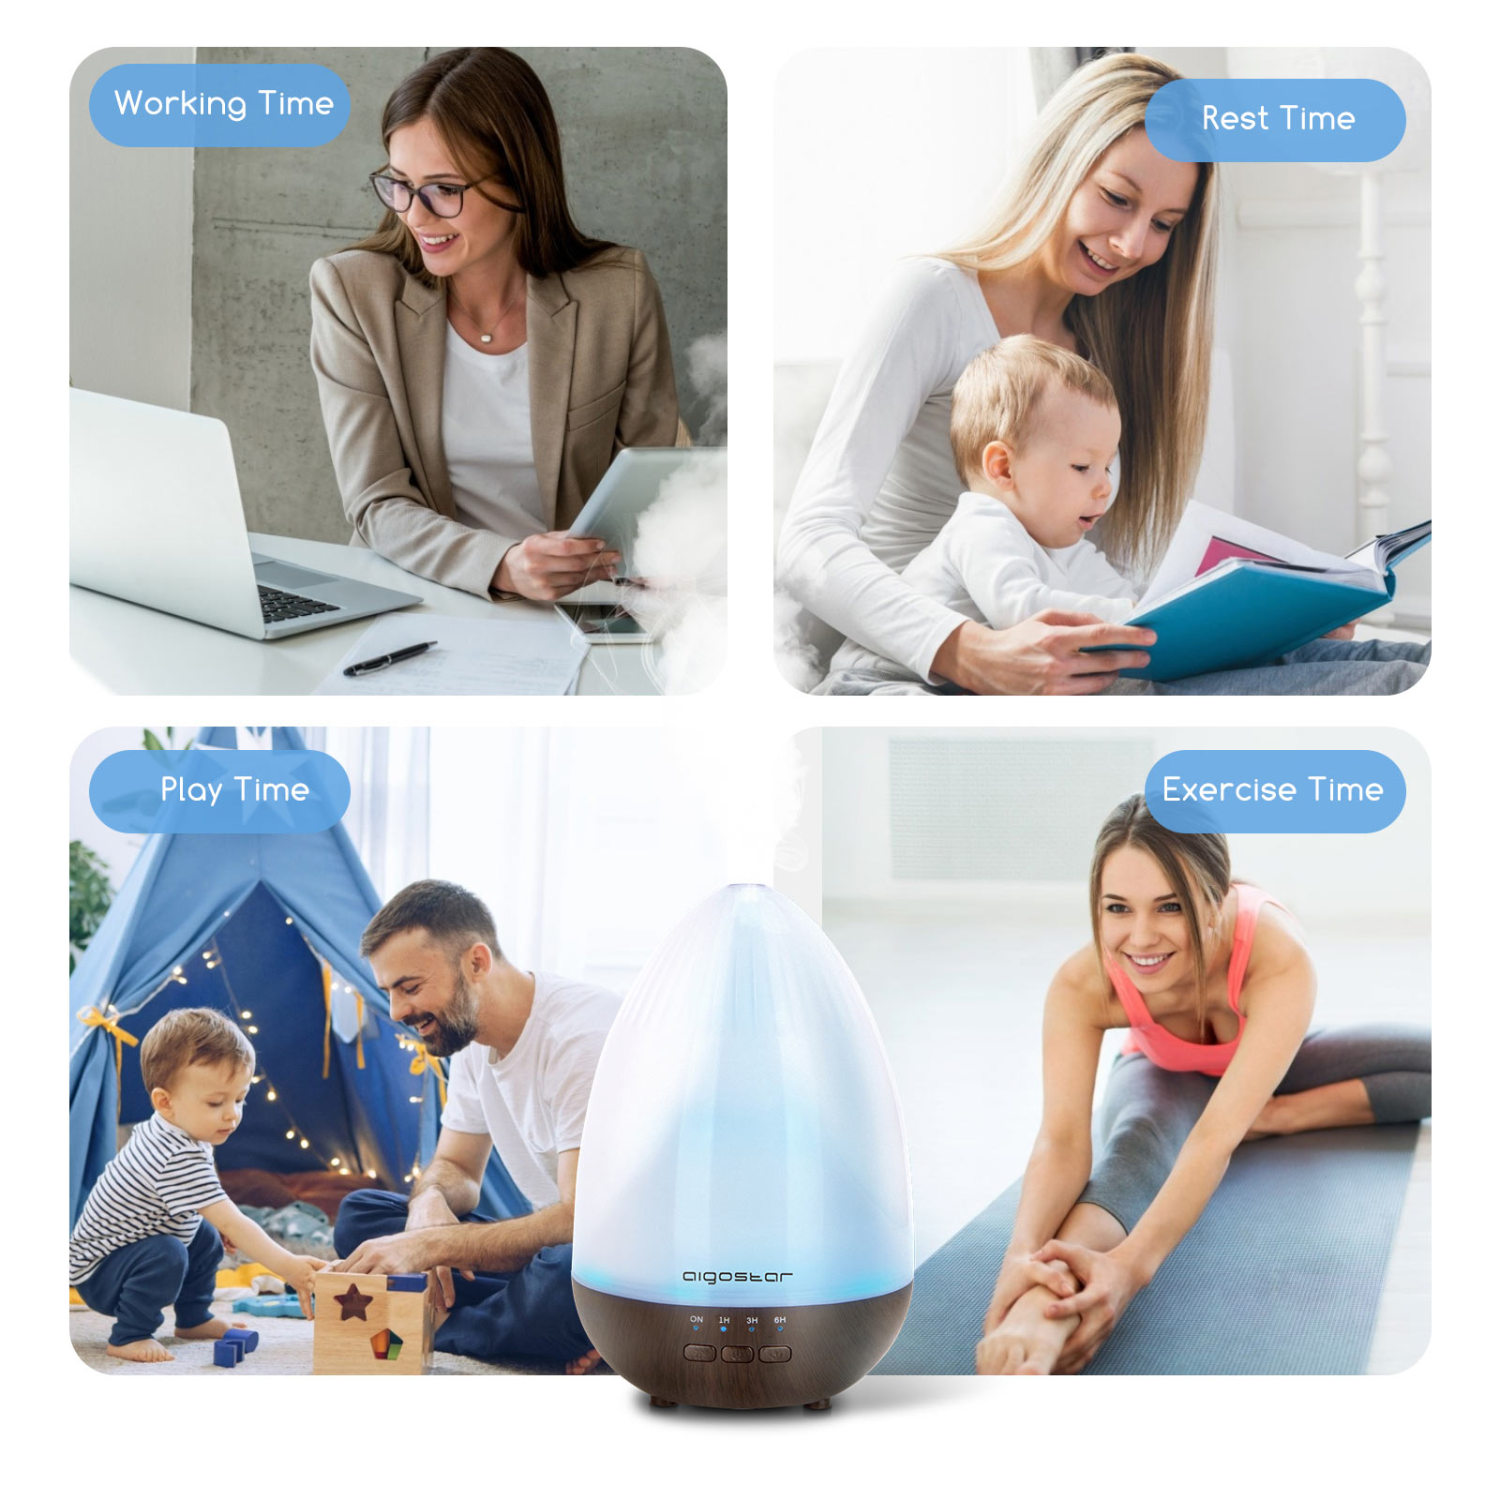 Aigostar Aroma Diffuser für ätherische öle Duftöl Diffuser Essential Oil Diffuser Aromatherapy Oil Diffuser 1/3/6 Hour Timer and 7 Color Lighting, Cold Mist Humidifier - Herb